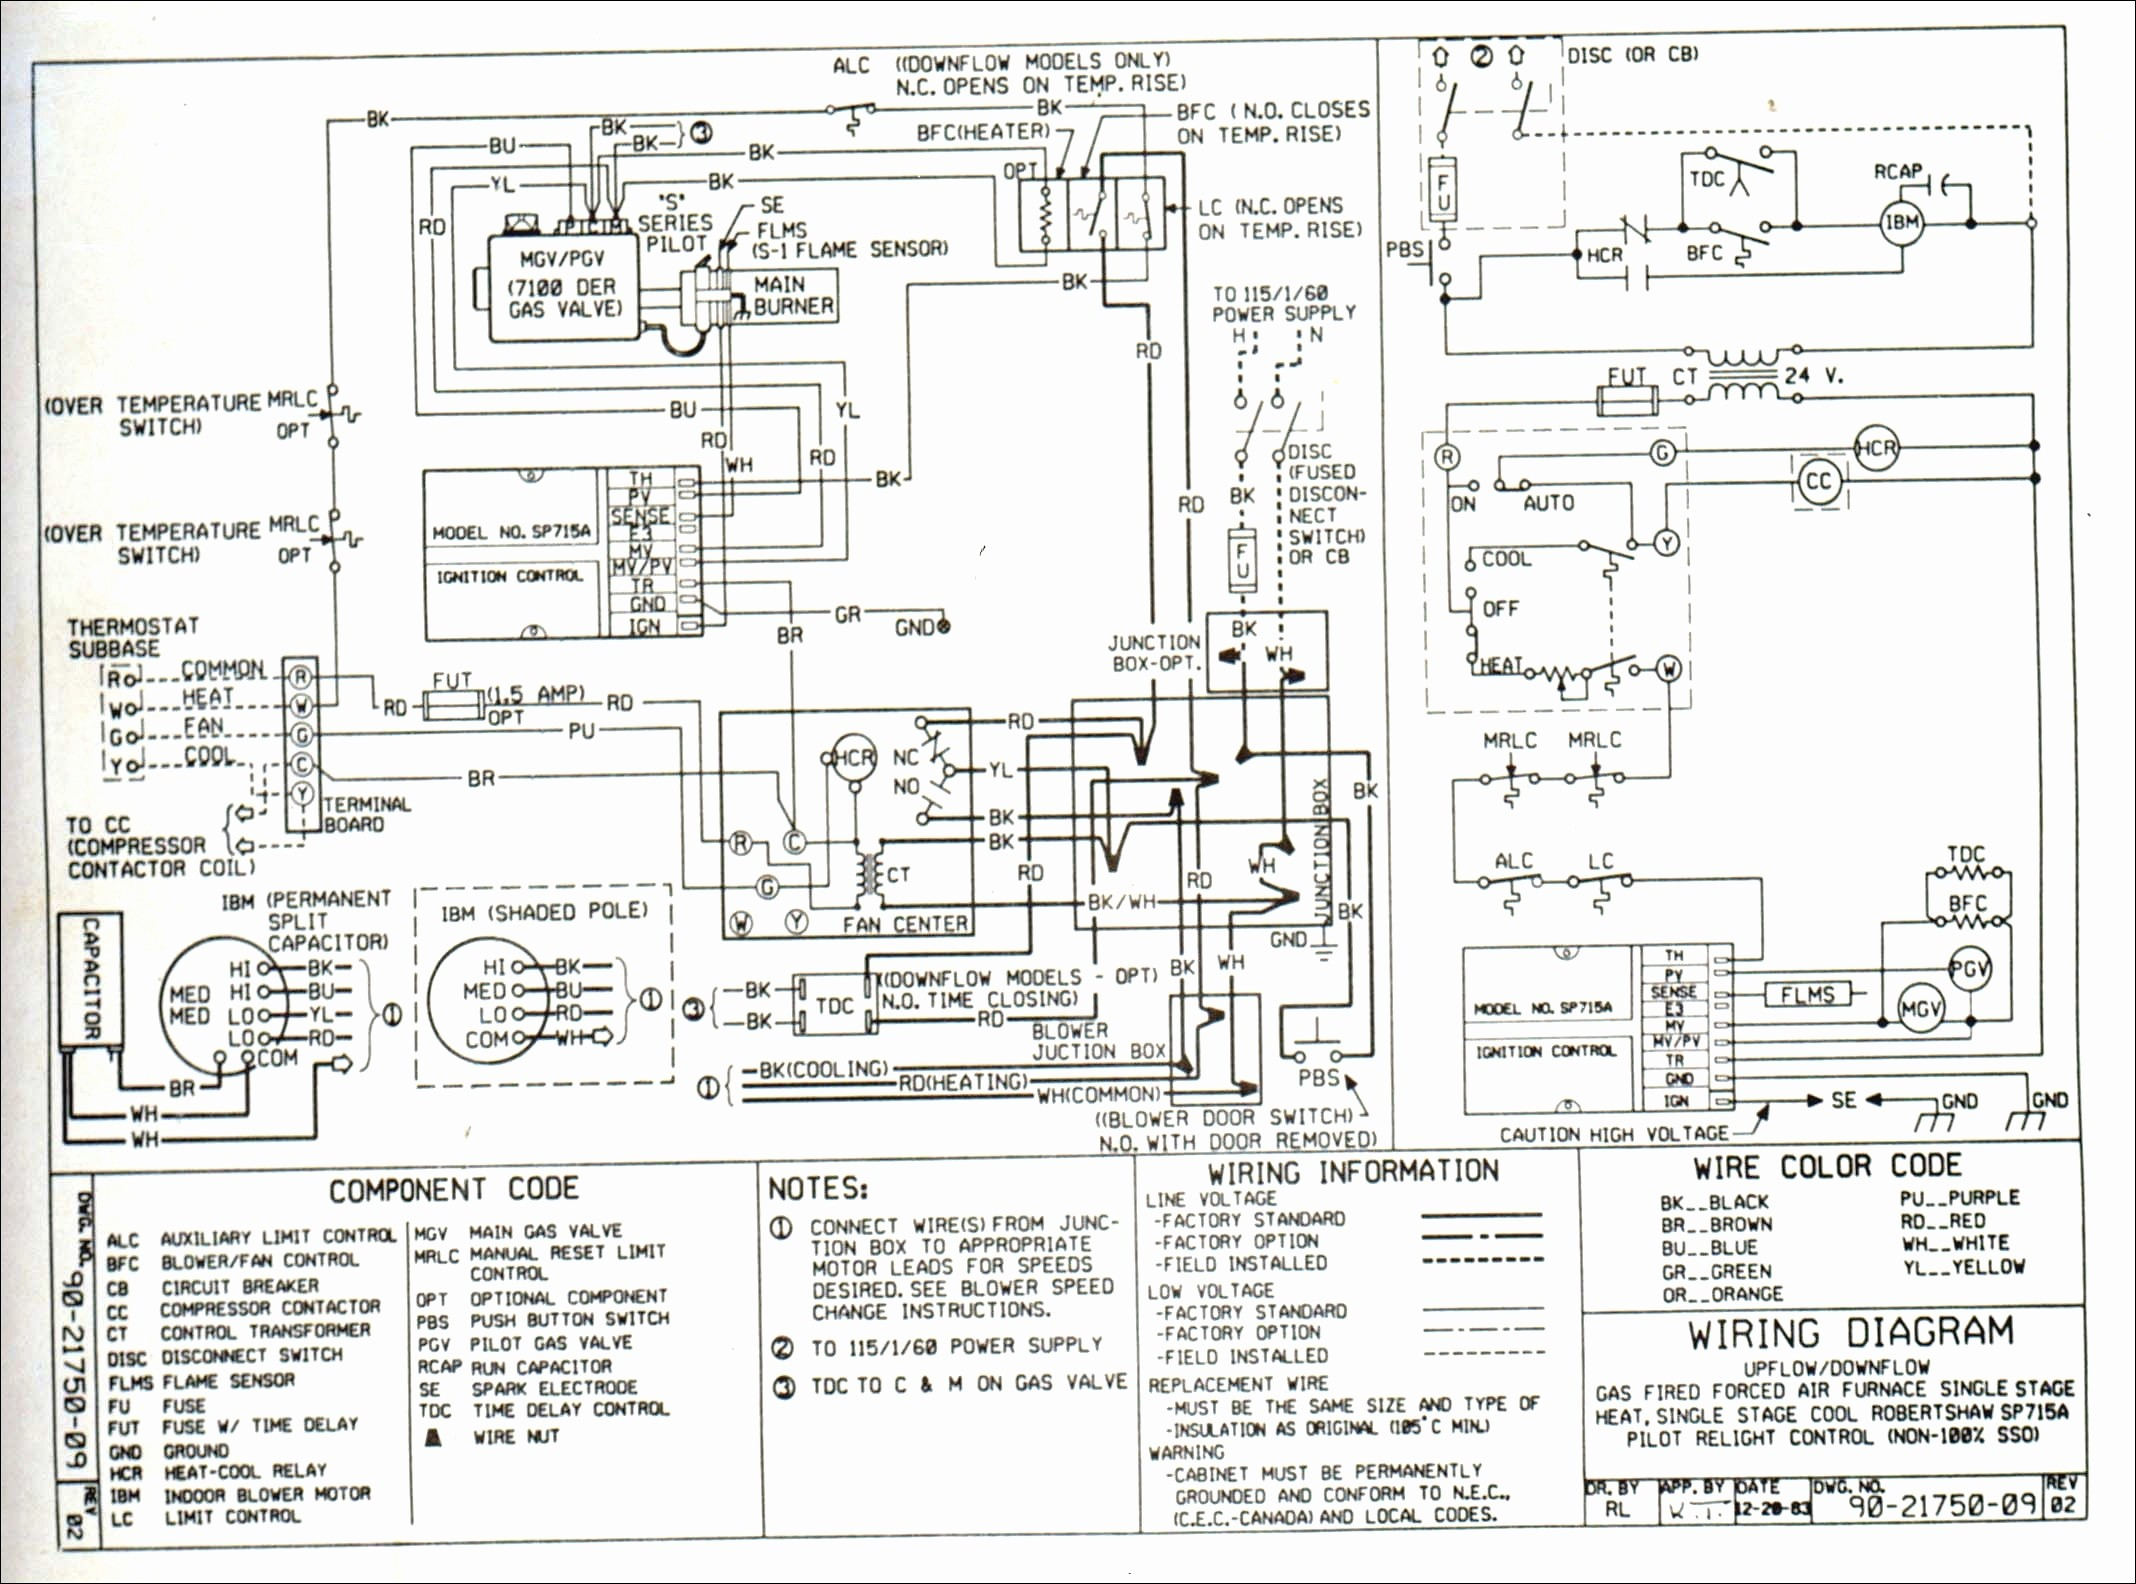 Ford F53 Ac Wiring | Wiring Library - Ford F53 Motorhome Chassis Wiring Diagram